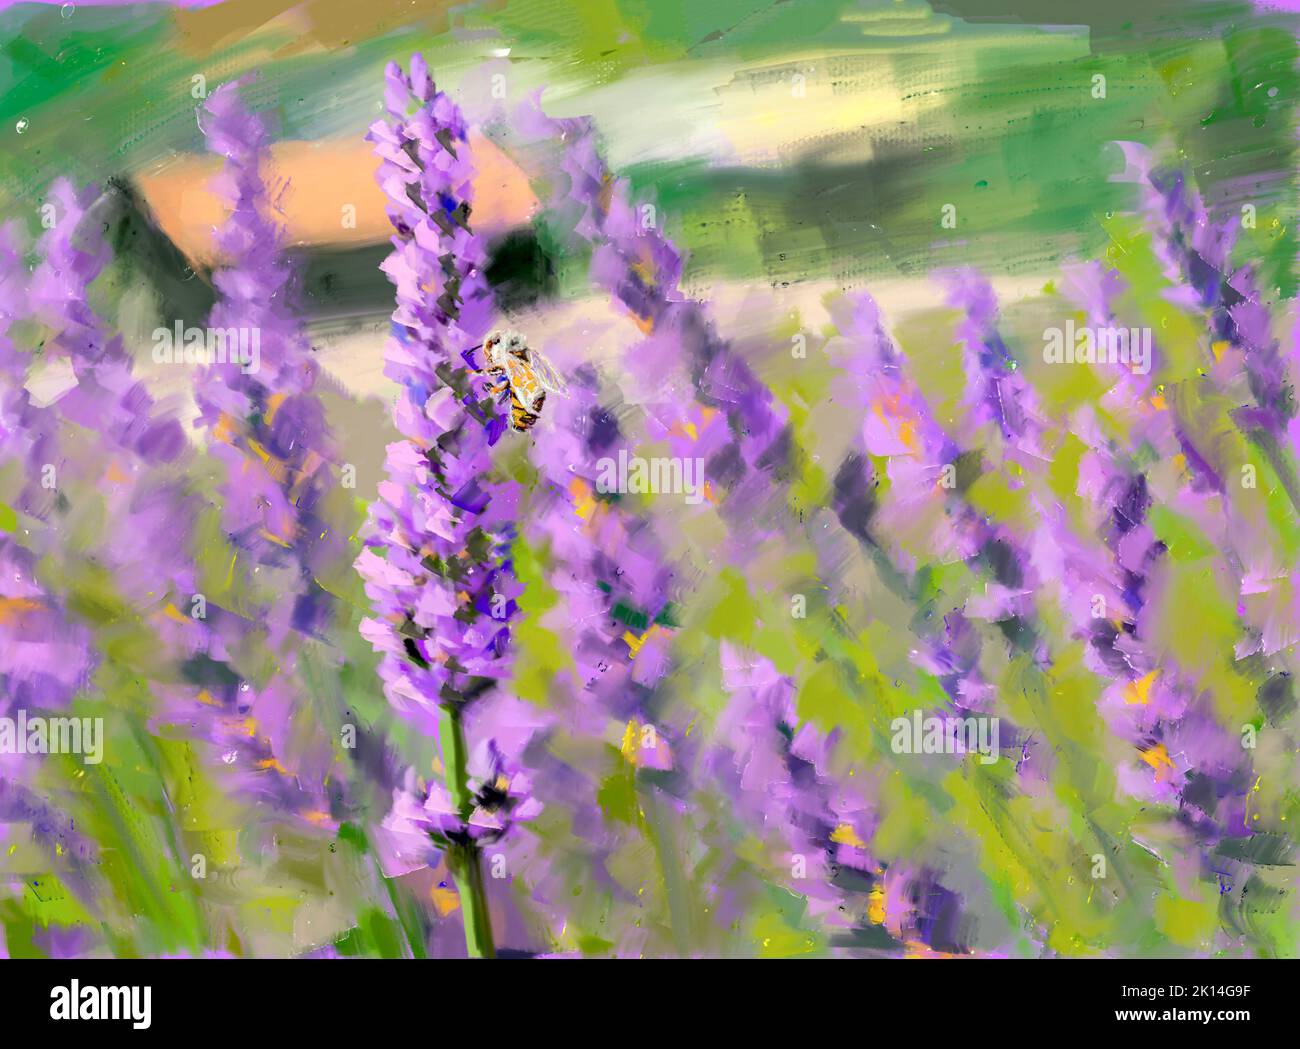 Violet lavender bush blooming in field. Bee pollinates the lavender flowers. Oil painting on canvas. Impressionism style art Stock Photo